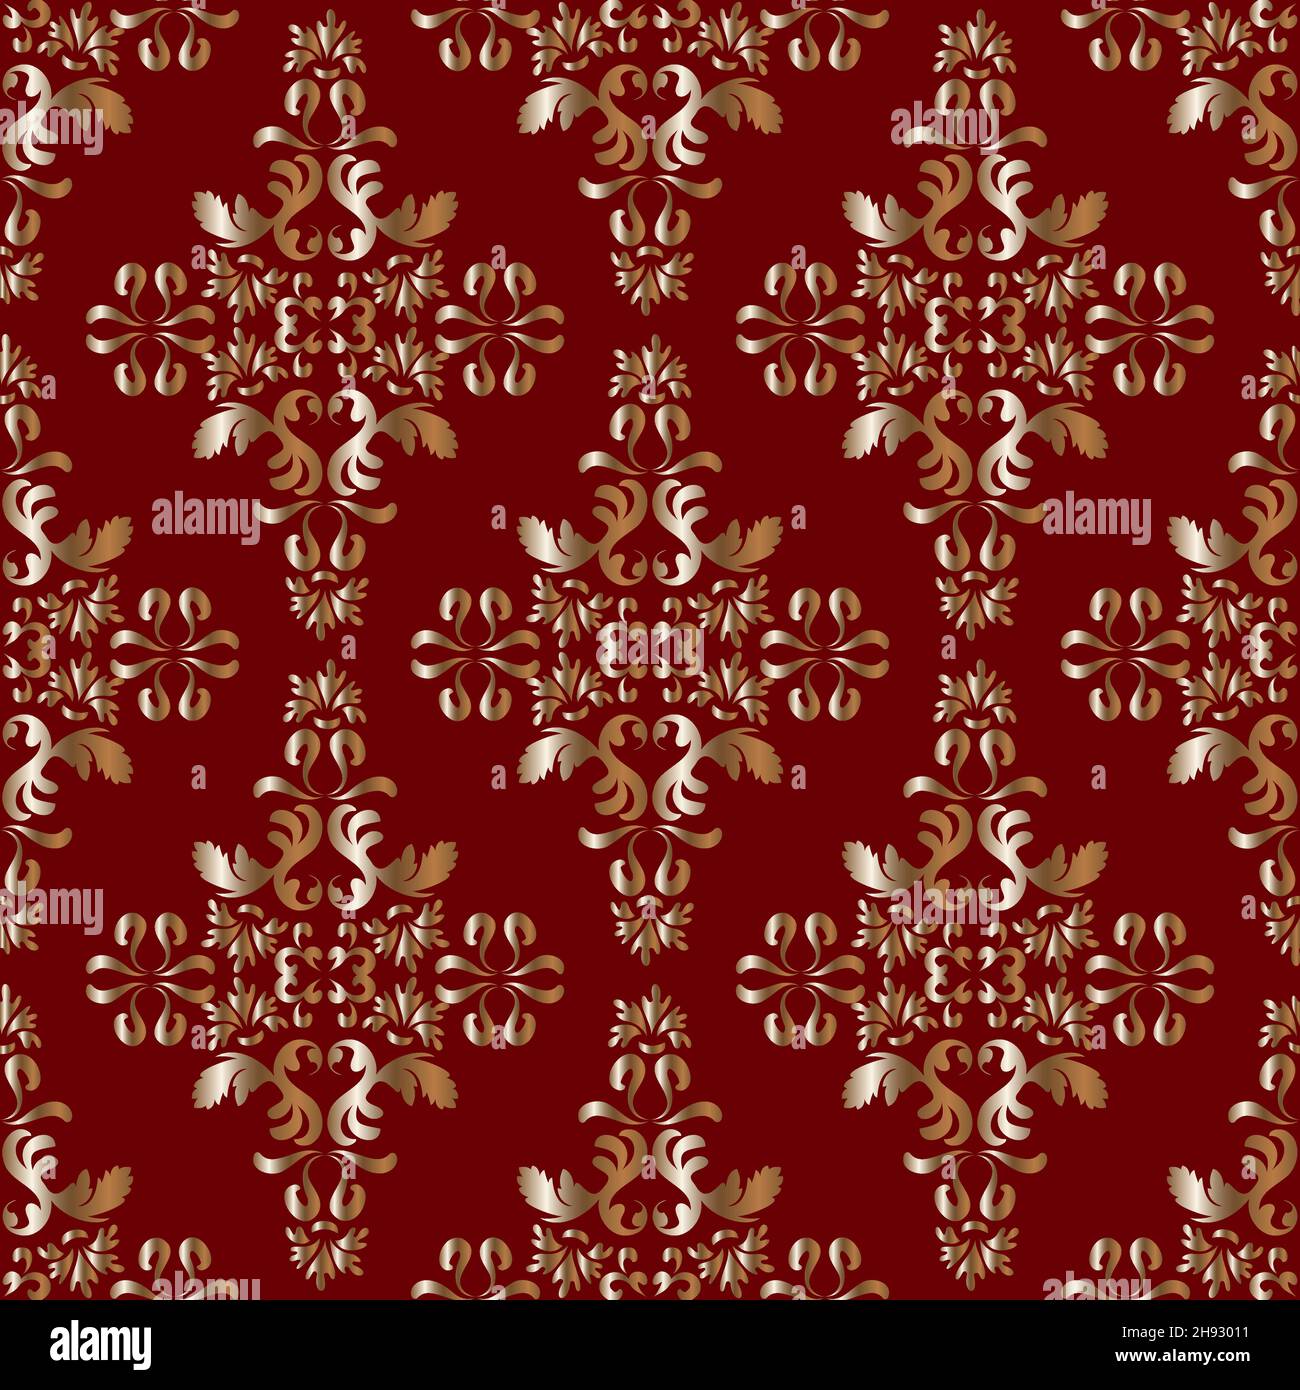 gold and red vintage background